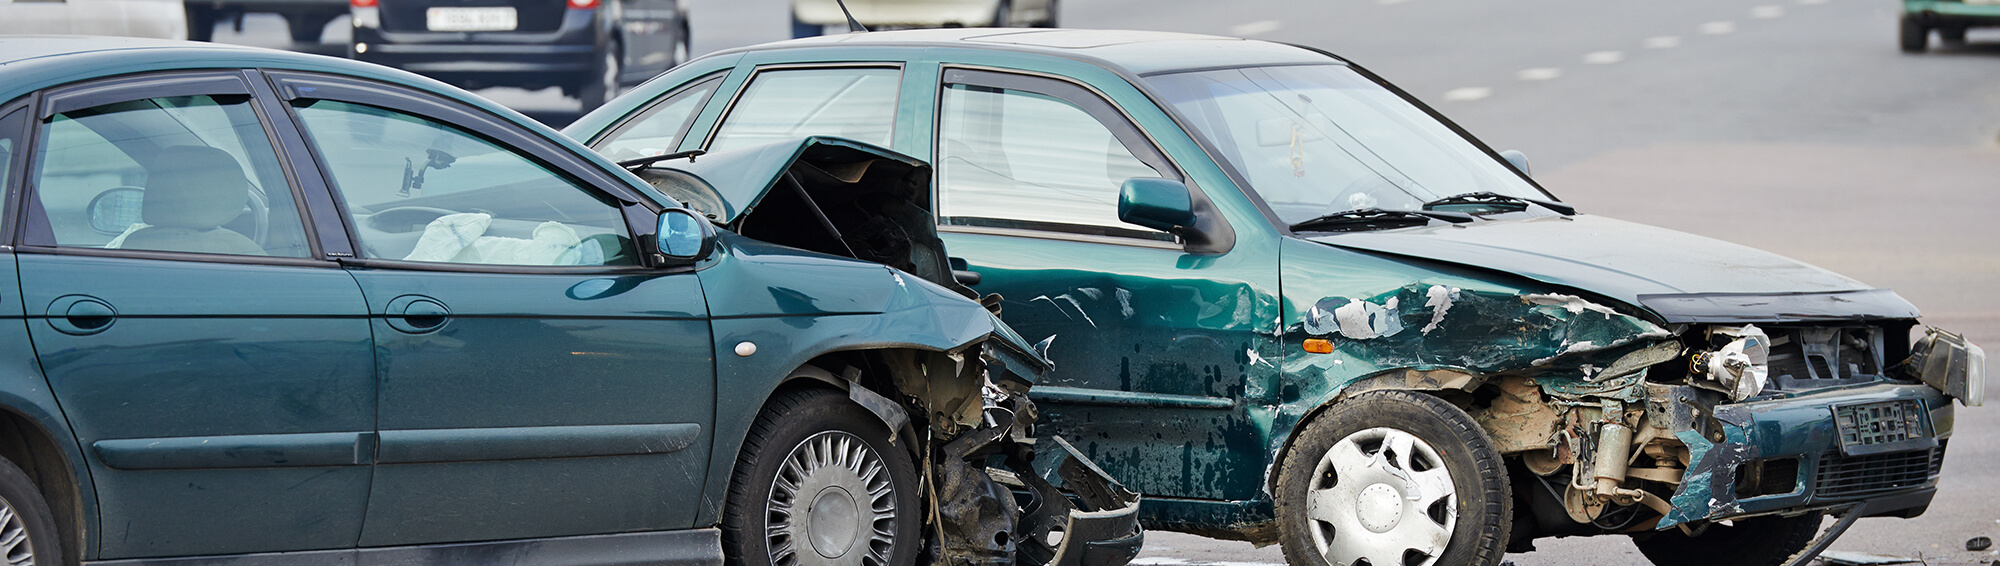 The Insurance Company Is Denying Your Injury Claim. What Now?